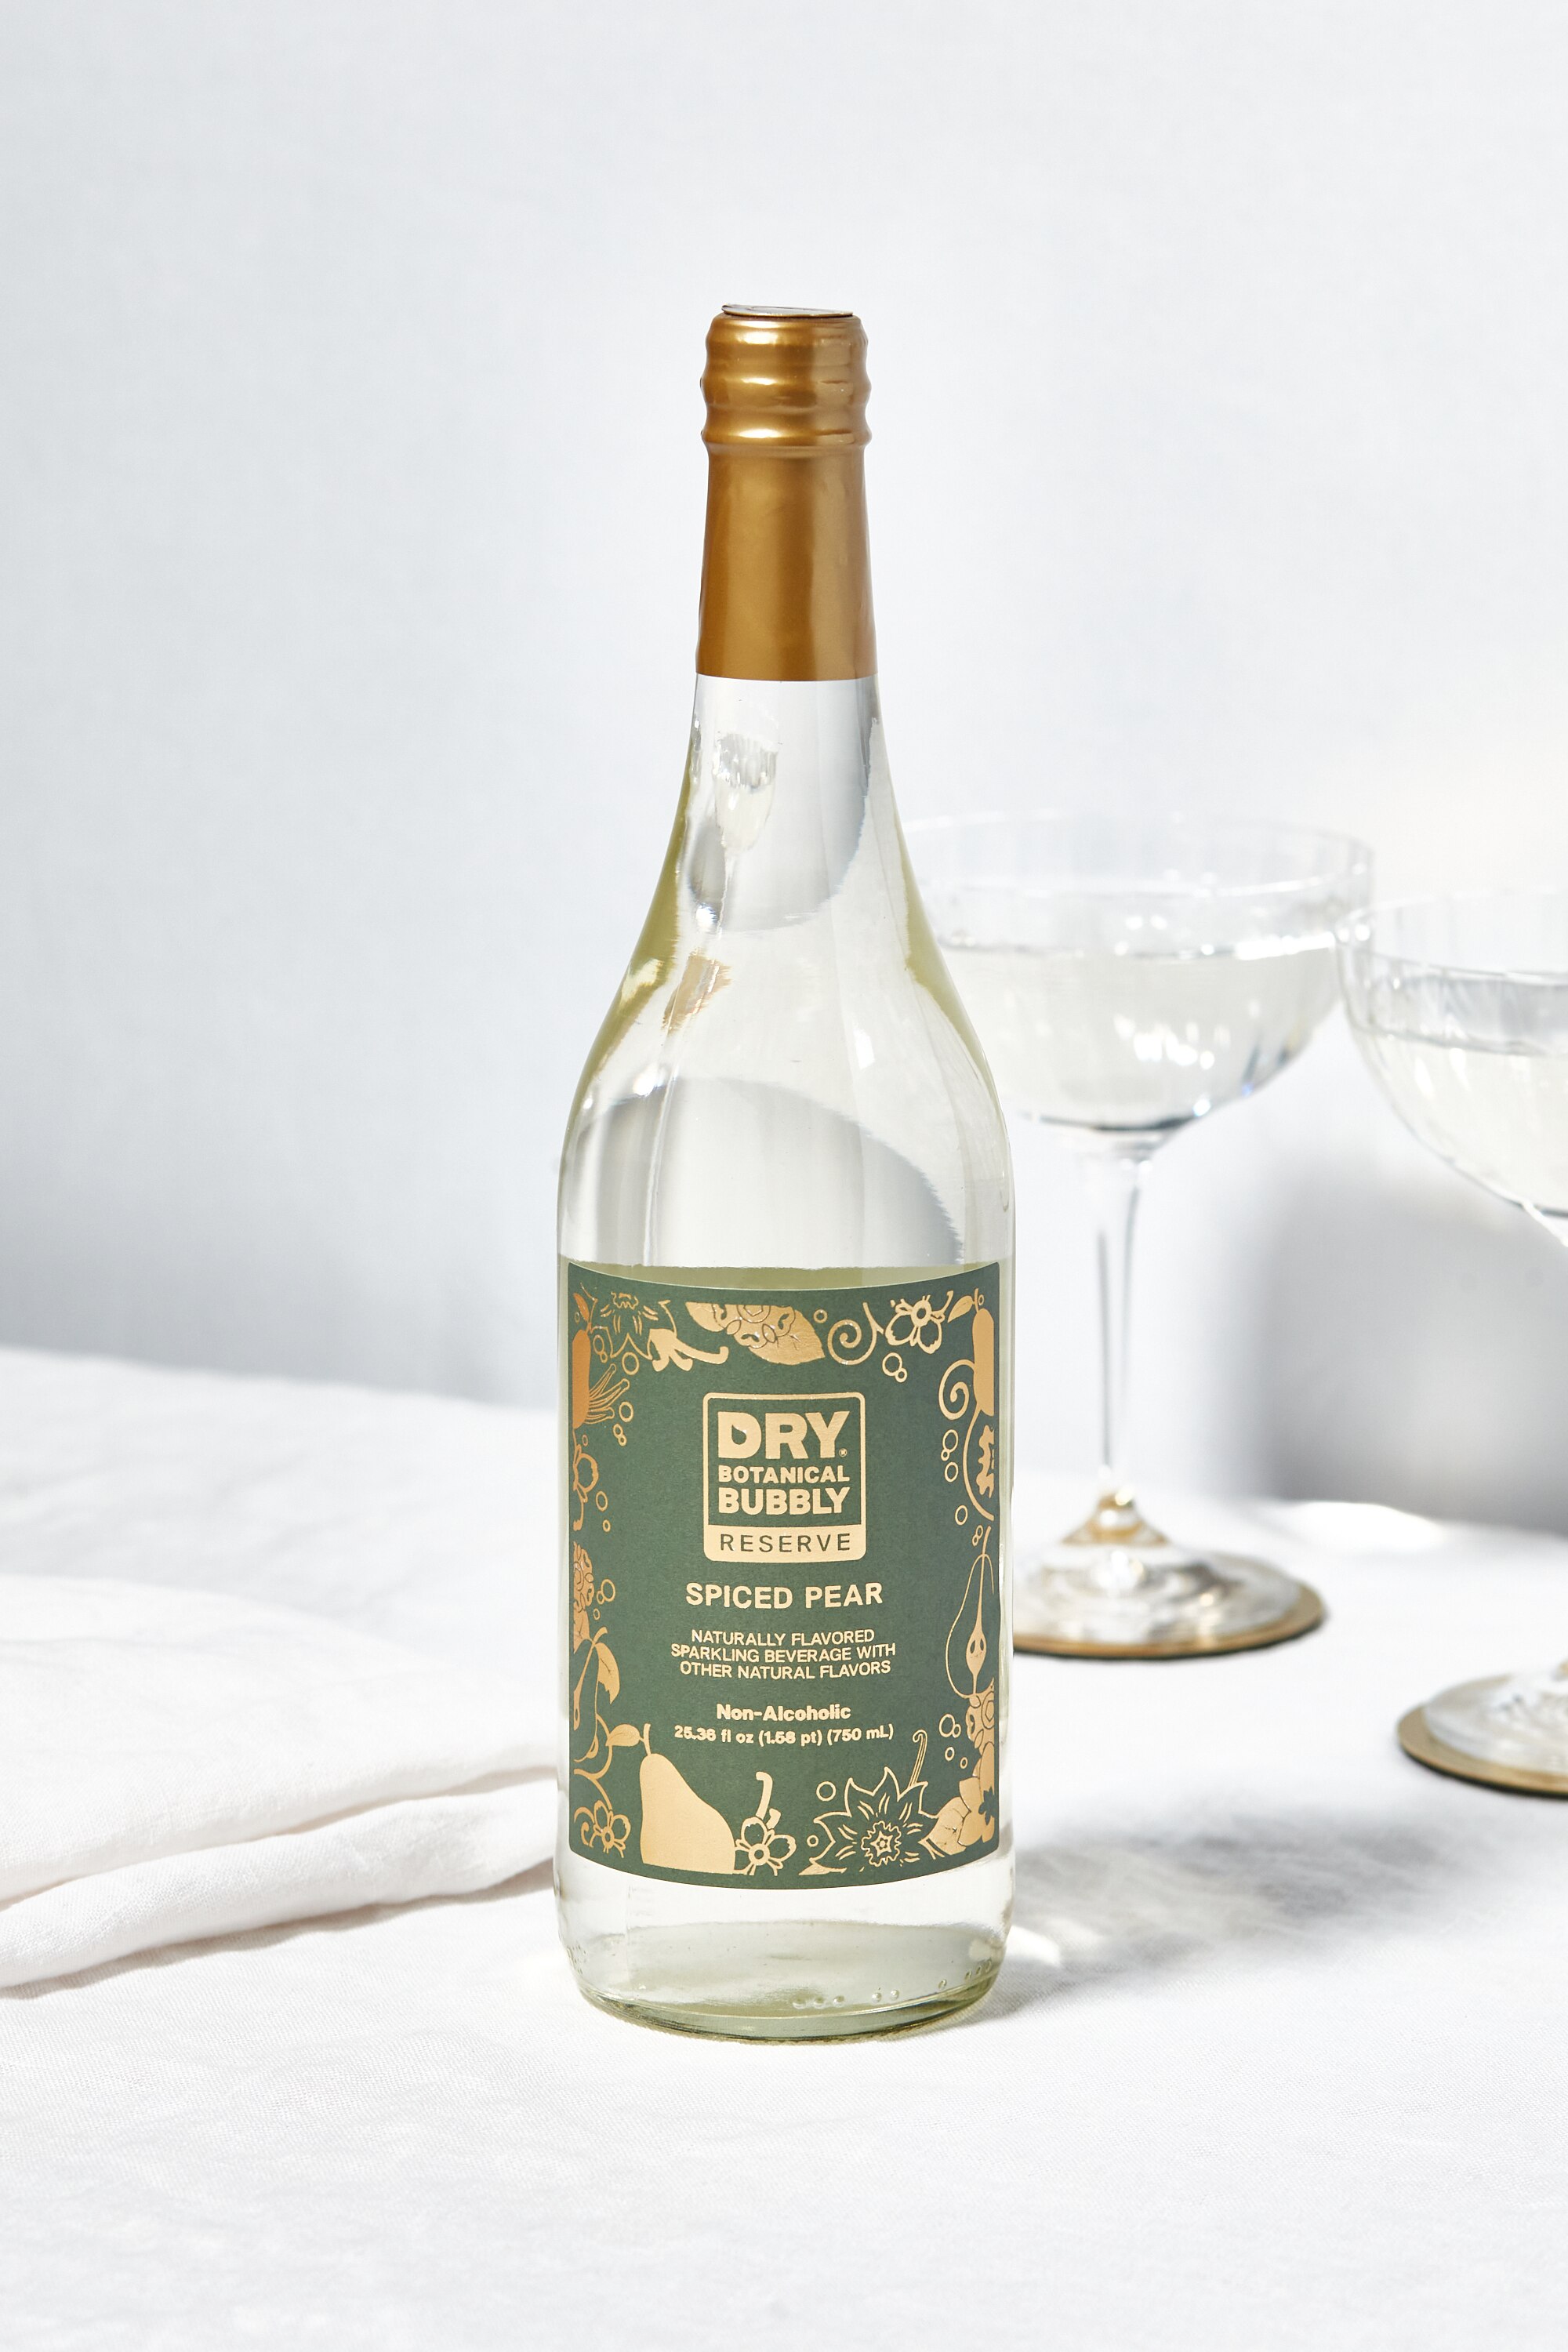 DRY Spiced Pear Botanical Bubbly Reserve